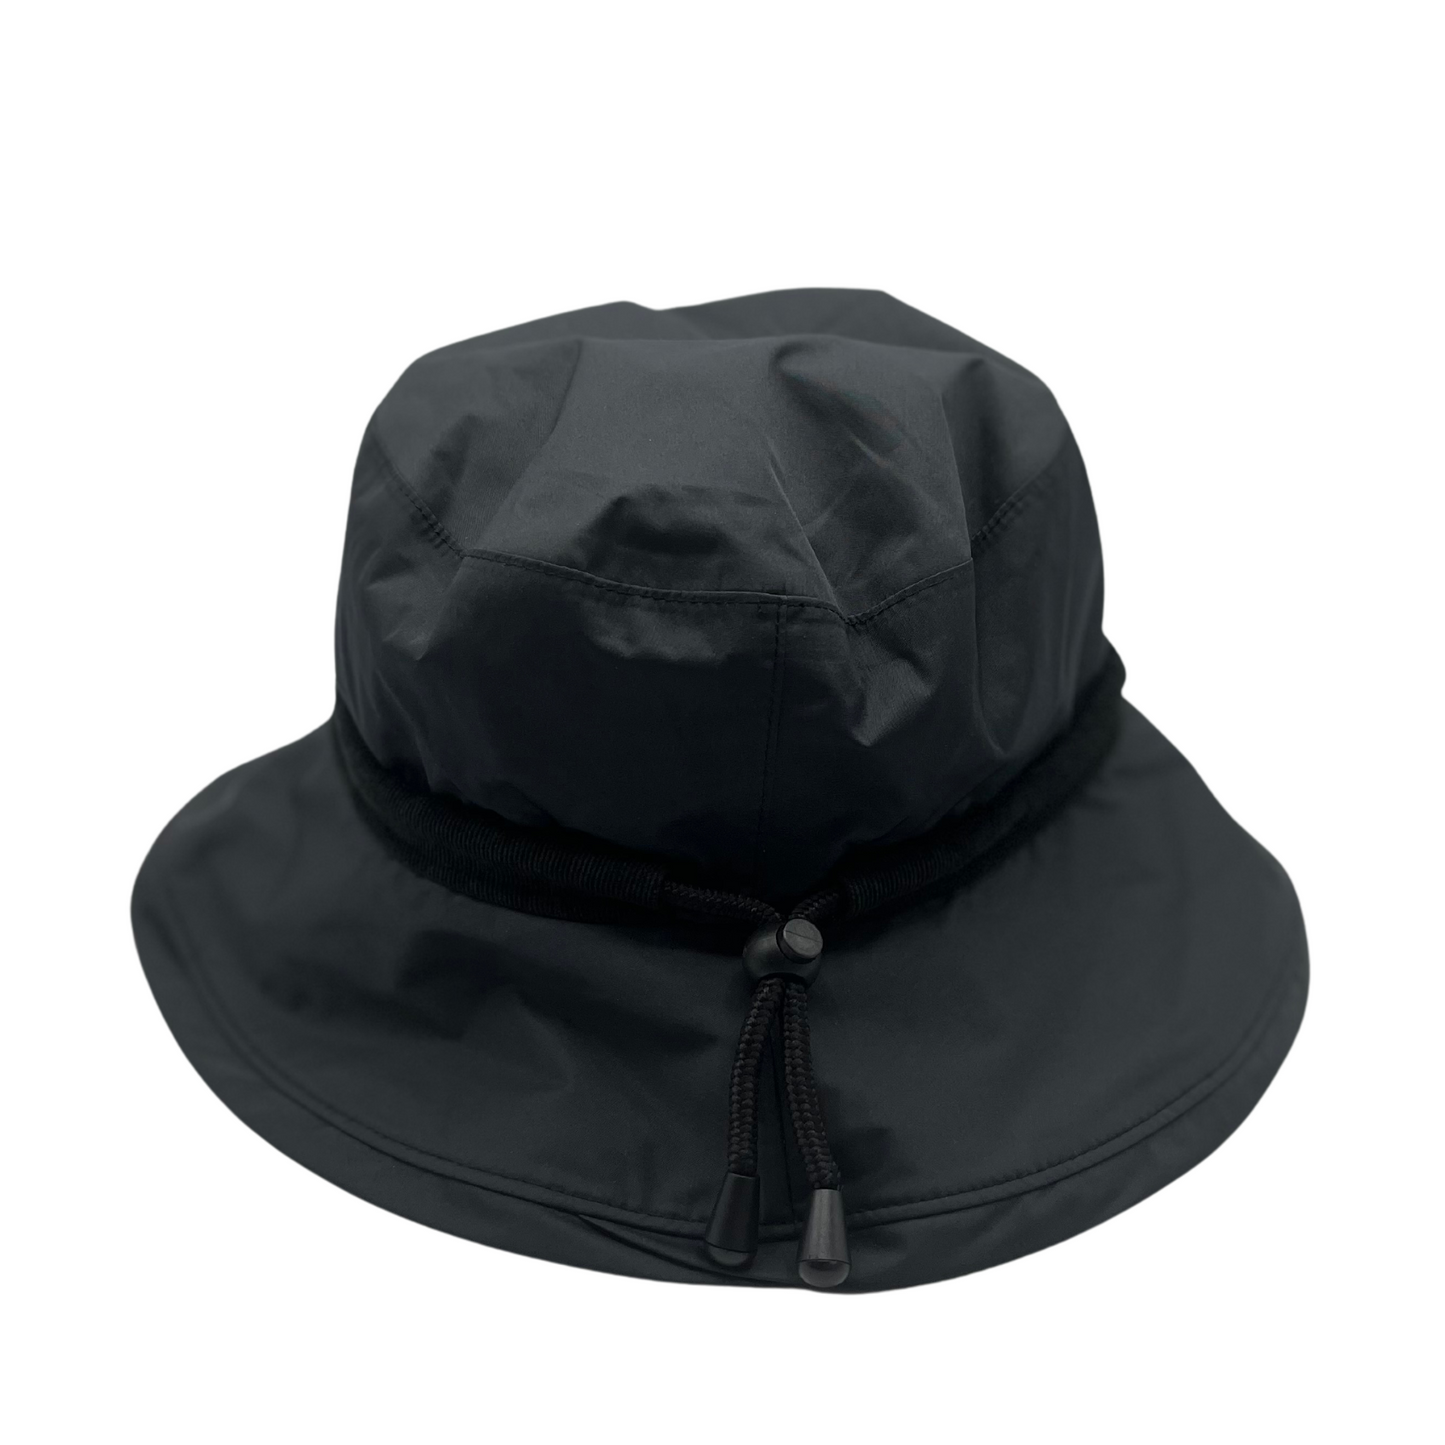 A front view of a black hat with a black drawstring.